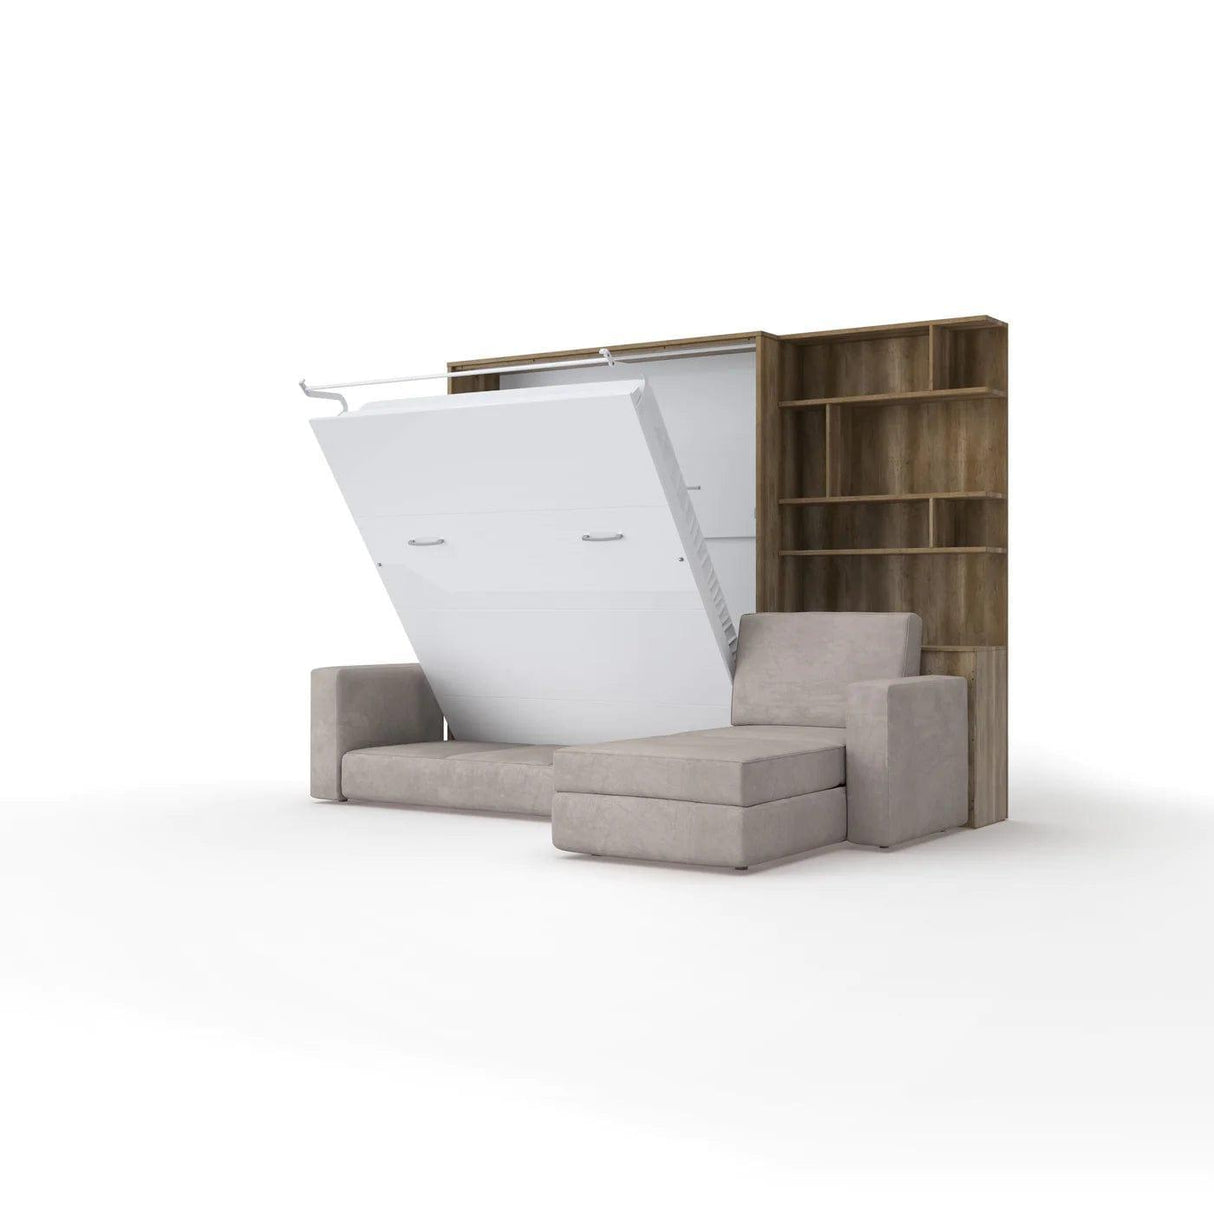 Maxima House Murphy Bed European Queen size with a Sectional Sofa and a Bookcase, INVENTO. Sale IN014/17OW-LB - Bedroom Depot USA